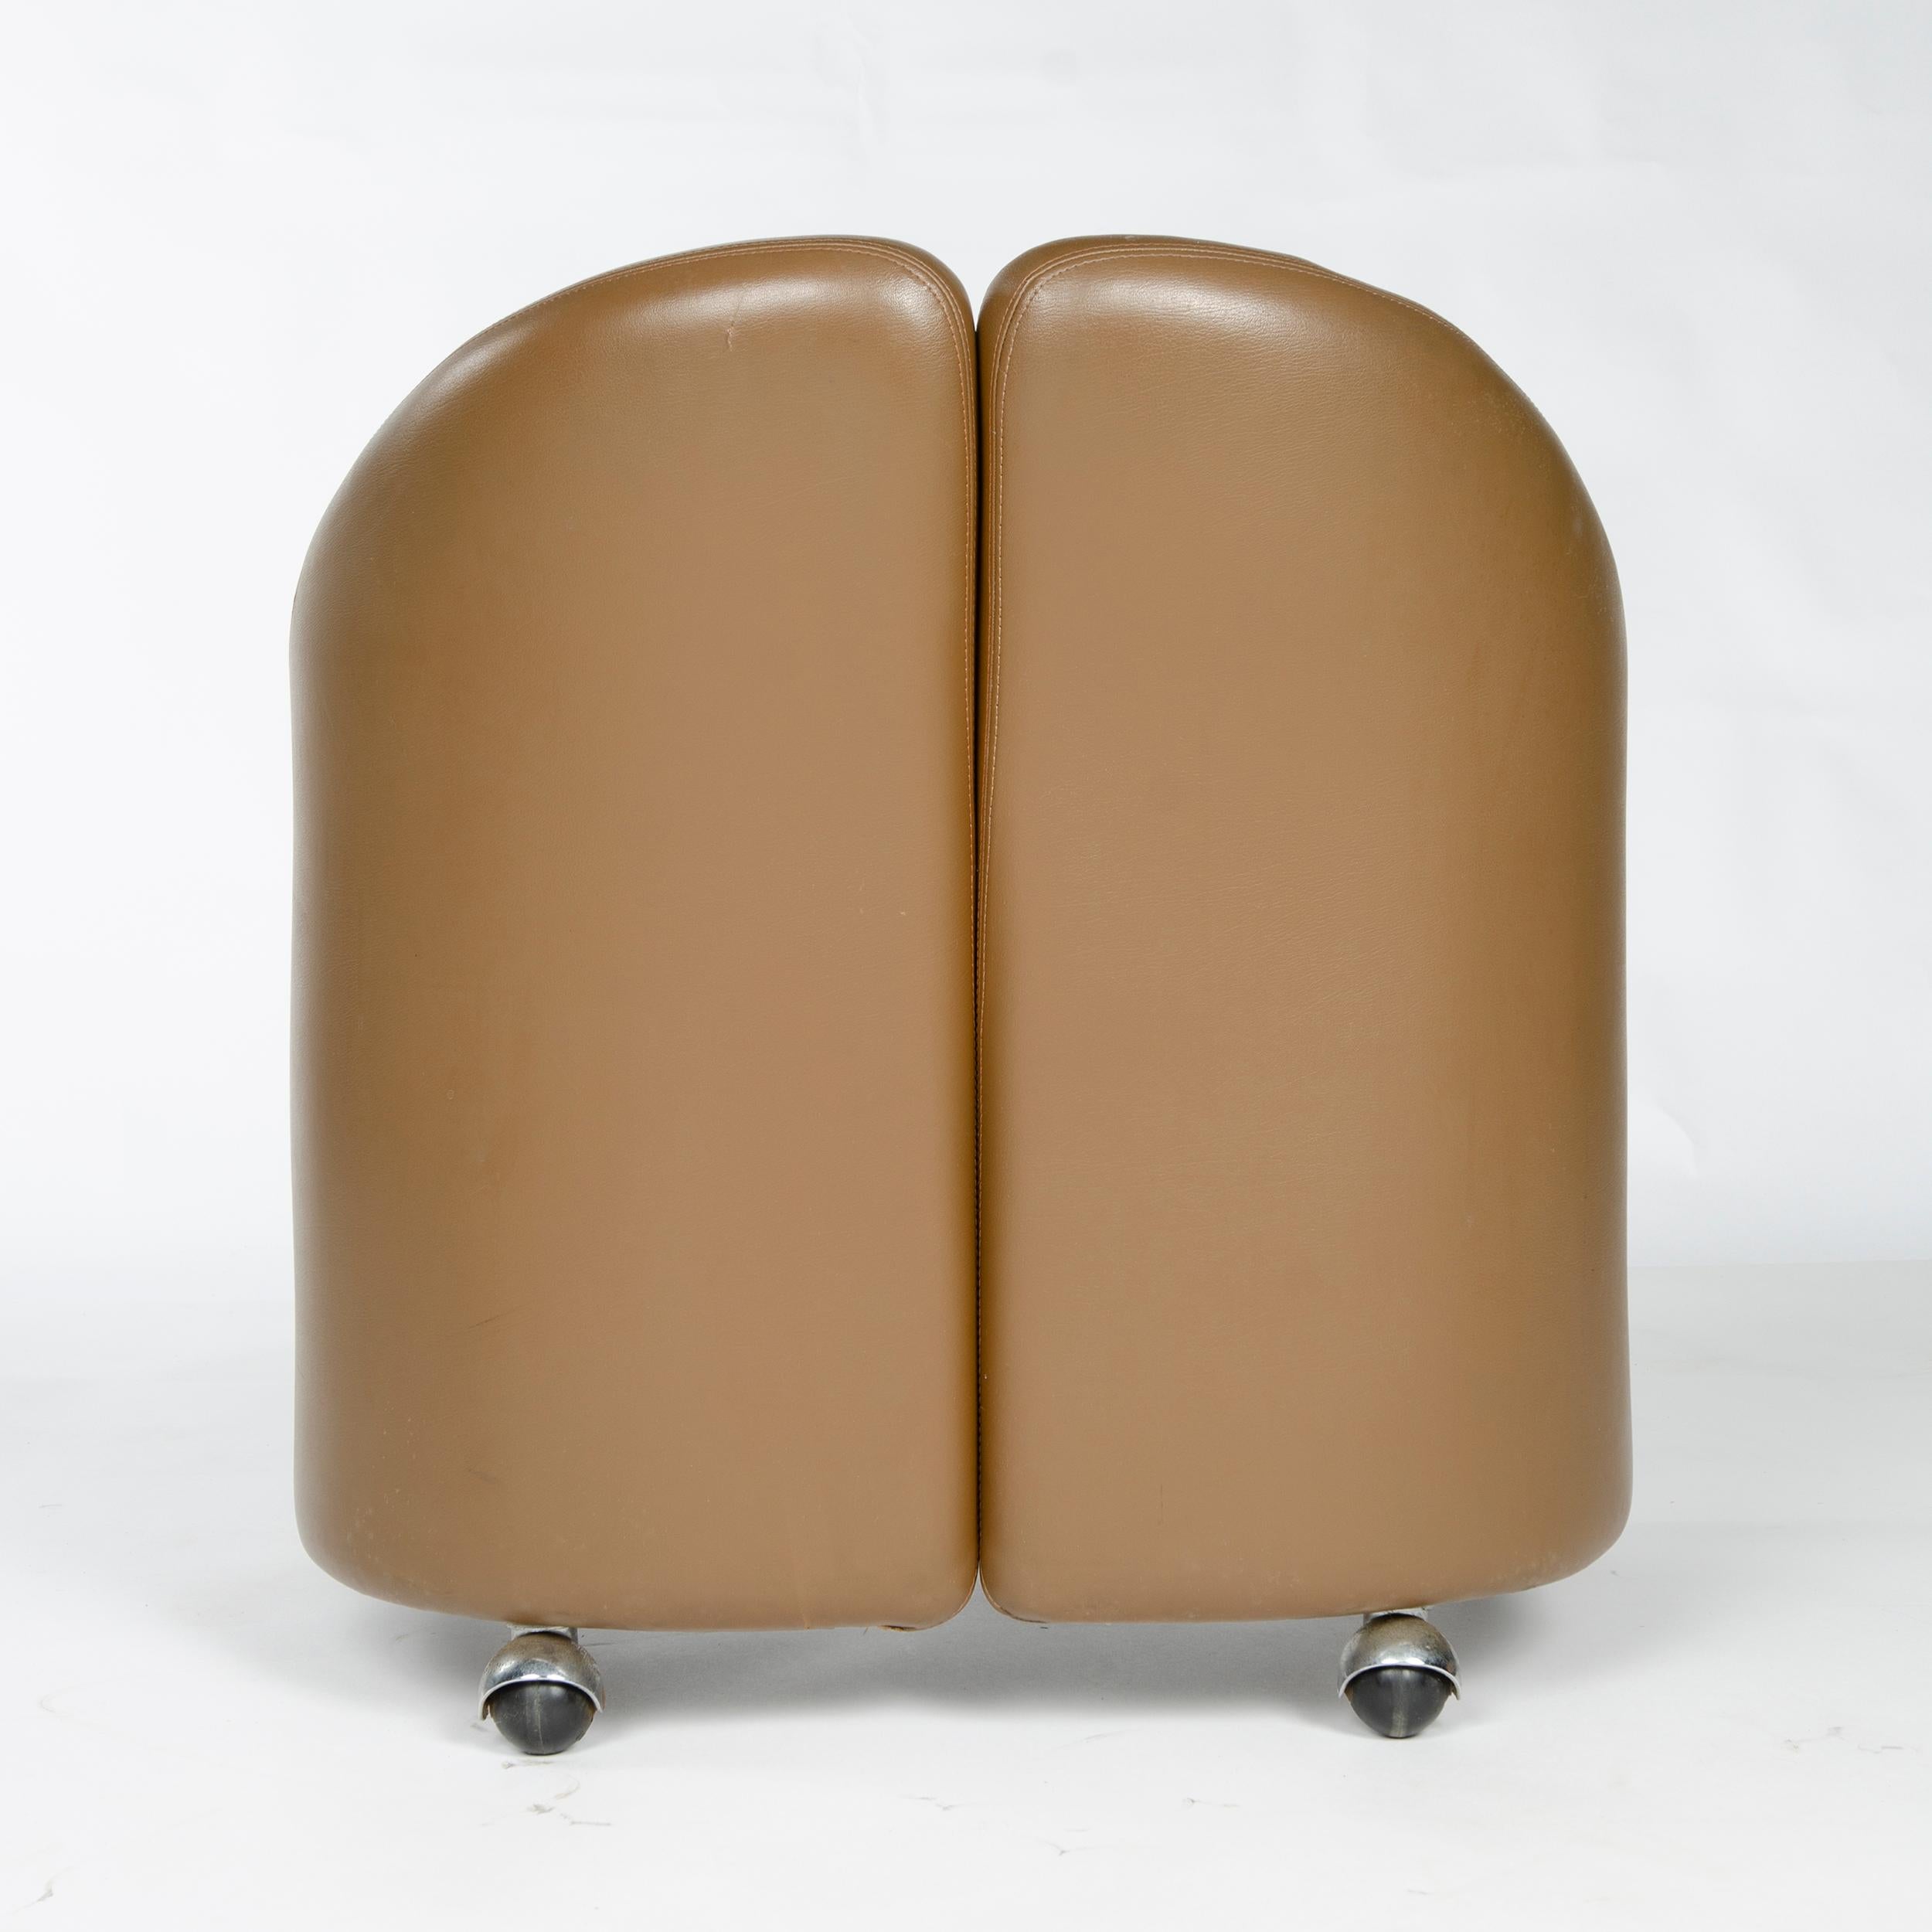 1970s Italian Barrel-Back Desk or Cocktail Chair by Eugenio Gerli for Tecno For Sale 2